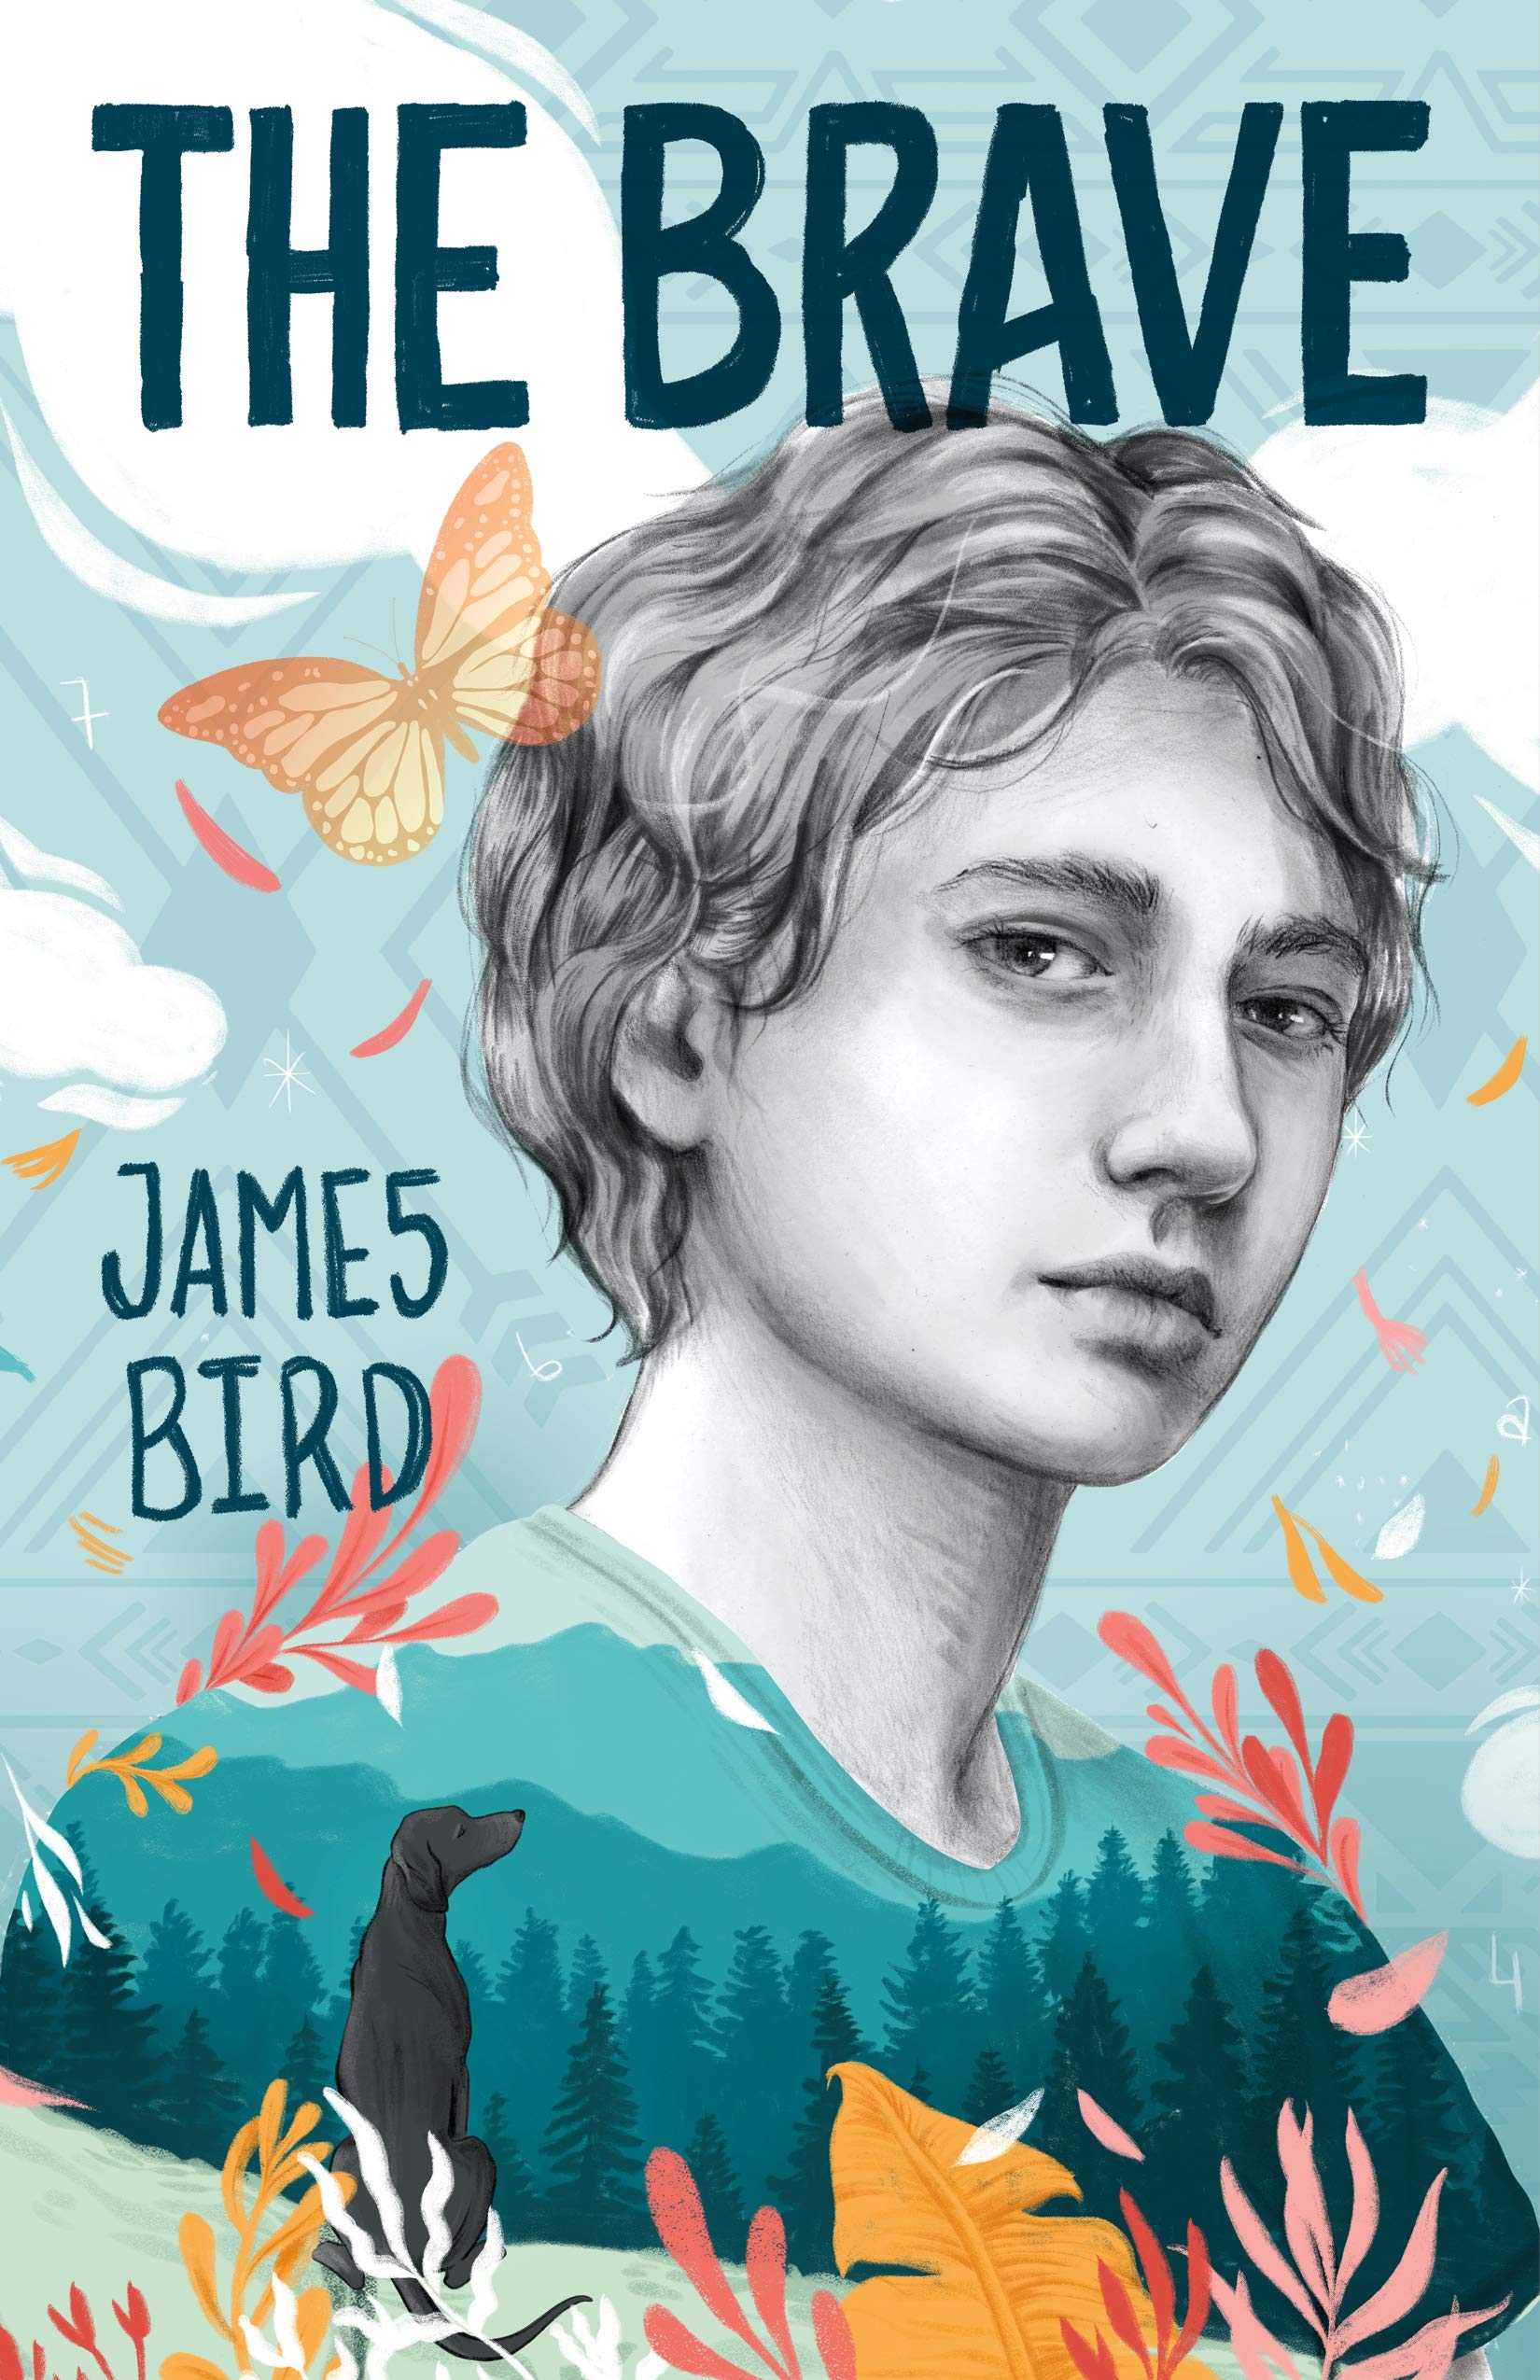 The Brave by James Bird book cover (light skinned boy's face rendered in black and white with butterflies, leaves and a dog around)